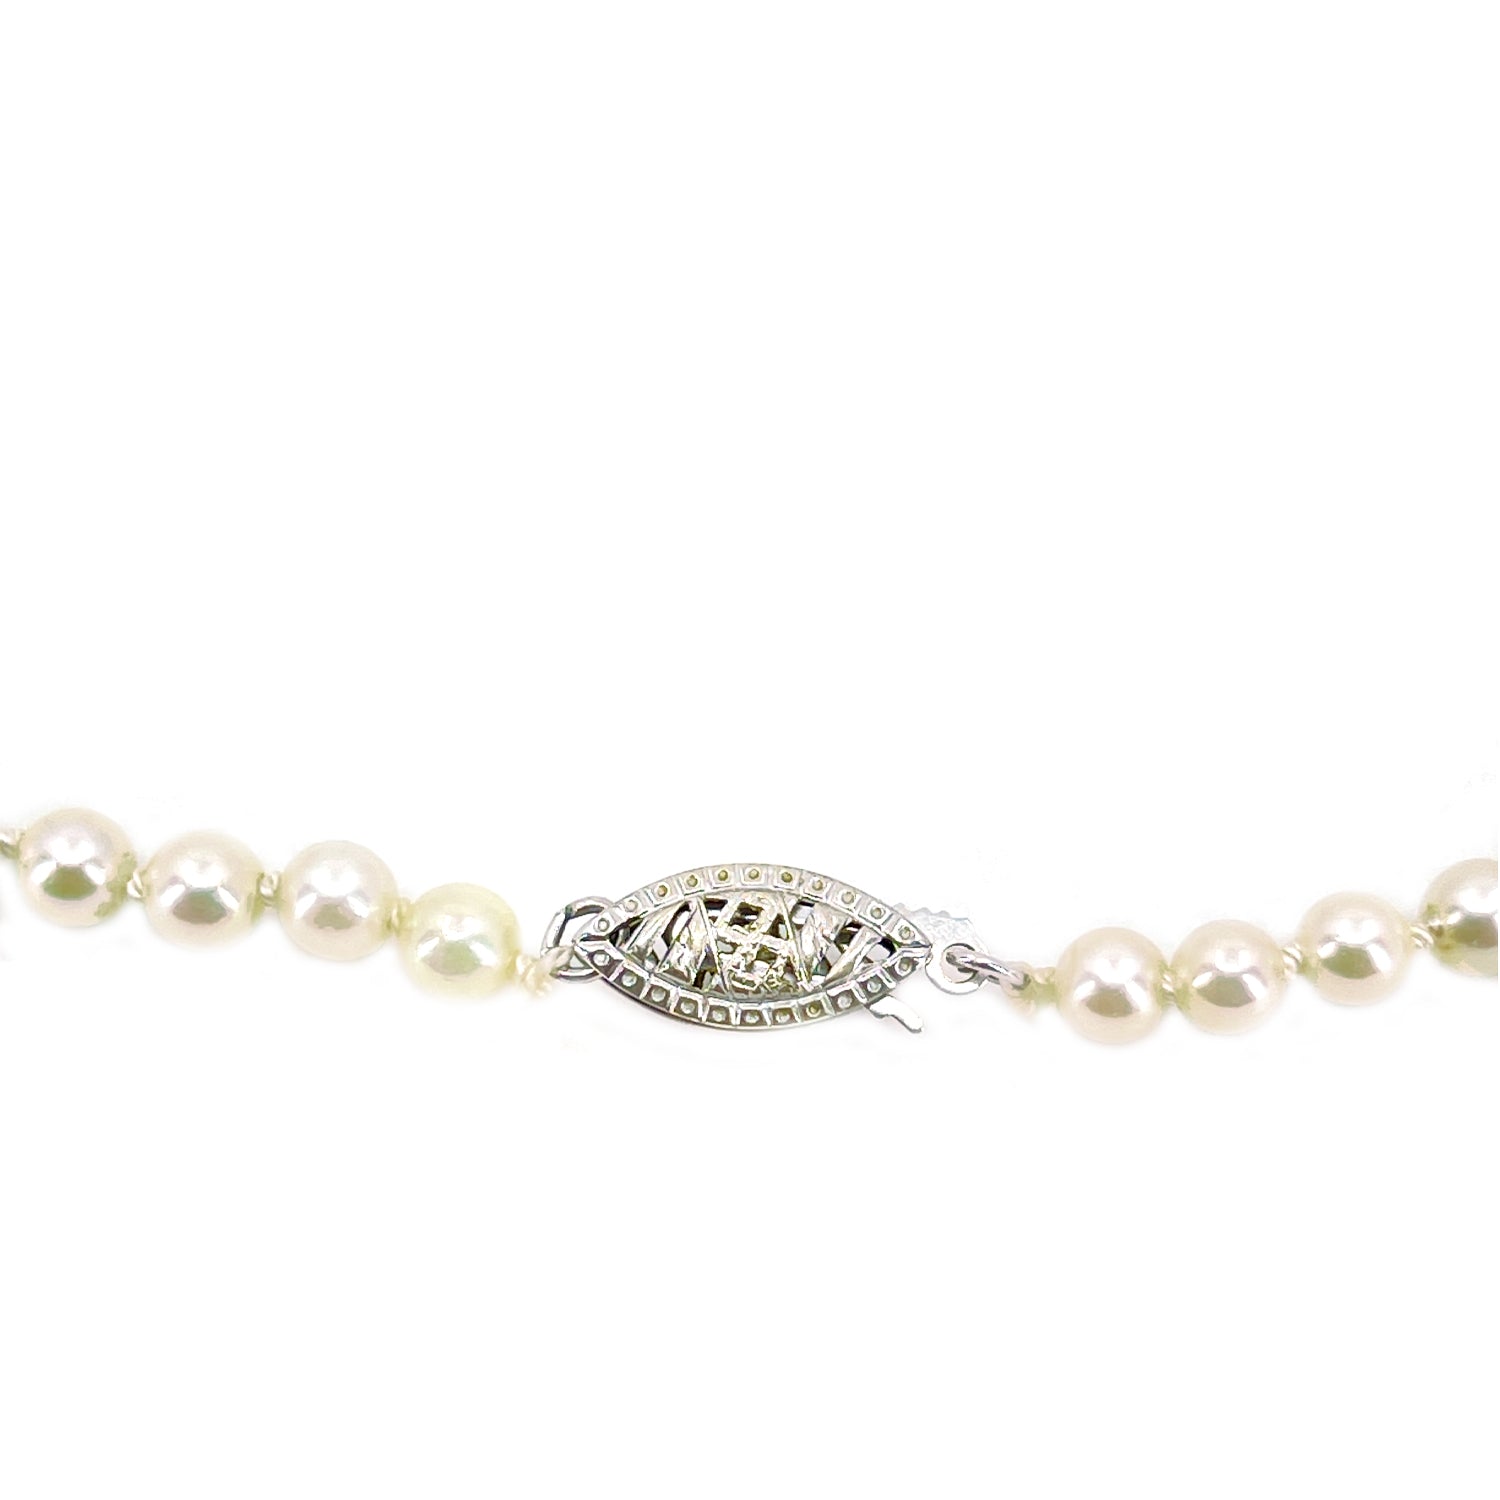 Vintage Retro Japanese Saltwater Cultured Akoya Pearl Graduated Necklace - 10K White Gold 18.50 Inch